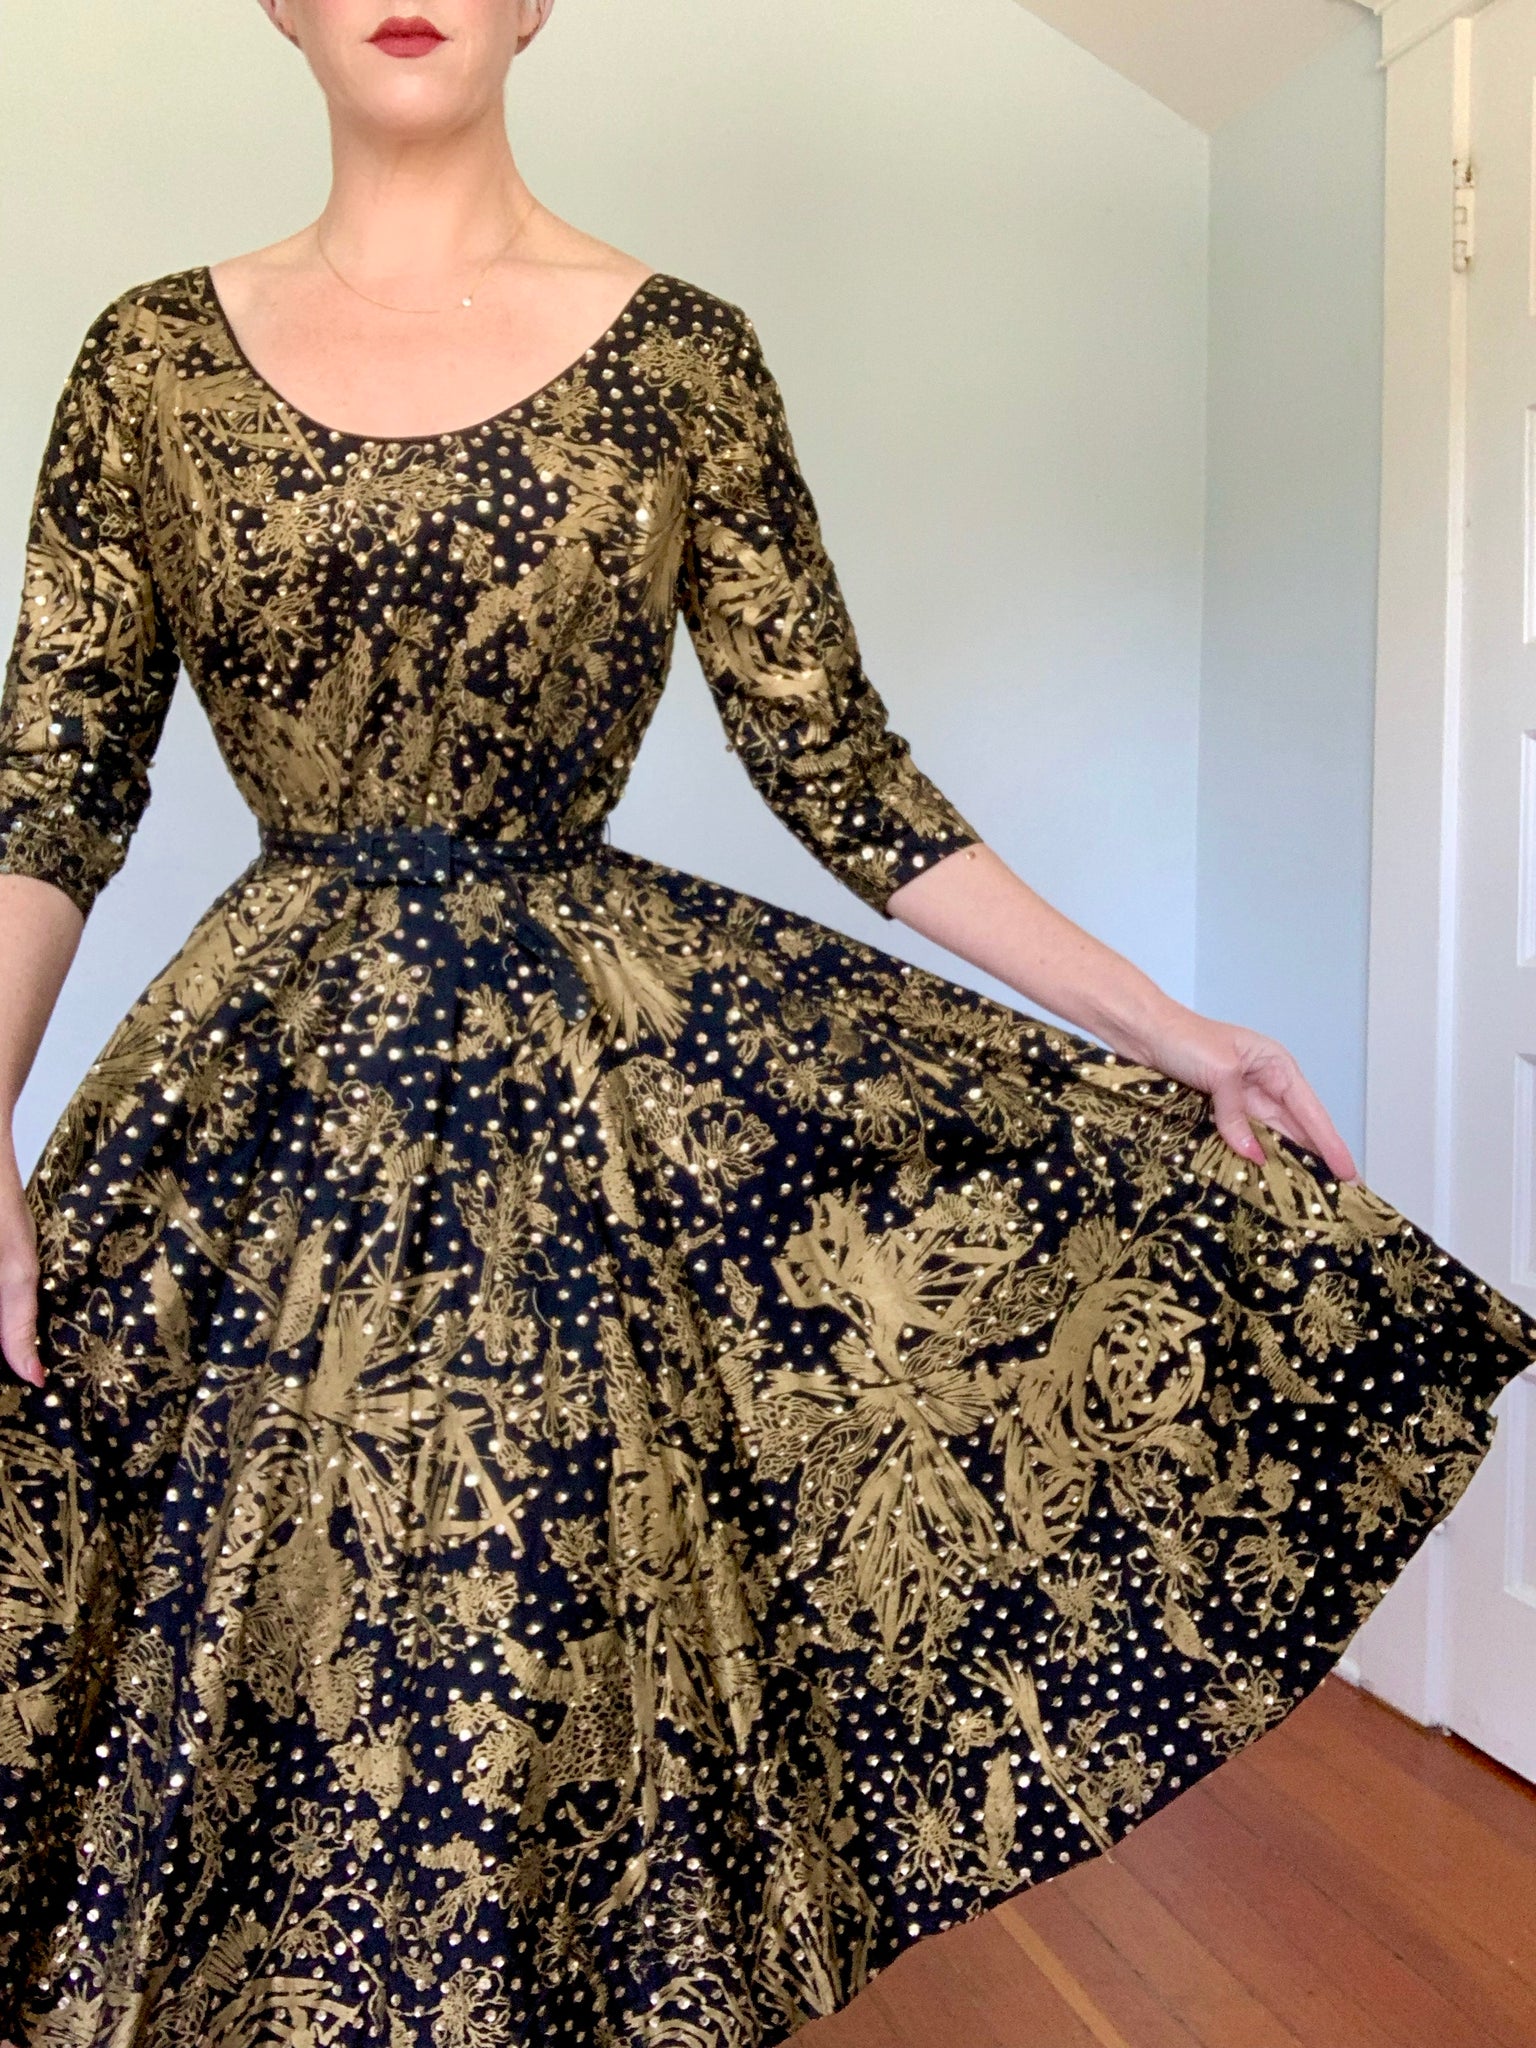 Dazzling 1950s Mexican Hand Painted Roses / Hand Sequined Cotton Party Dress w/ Belt